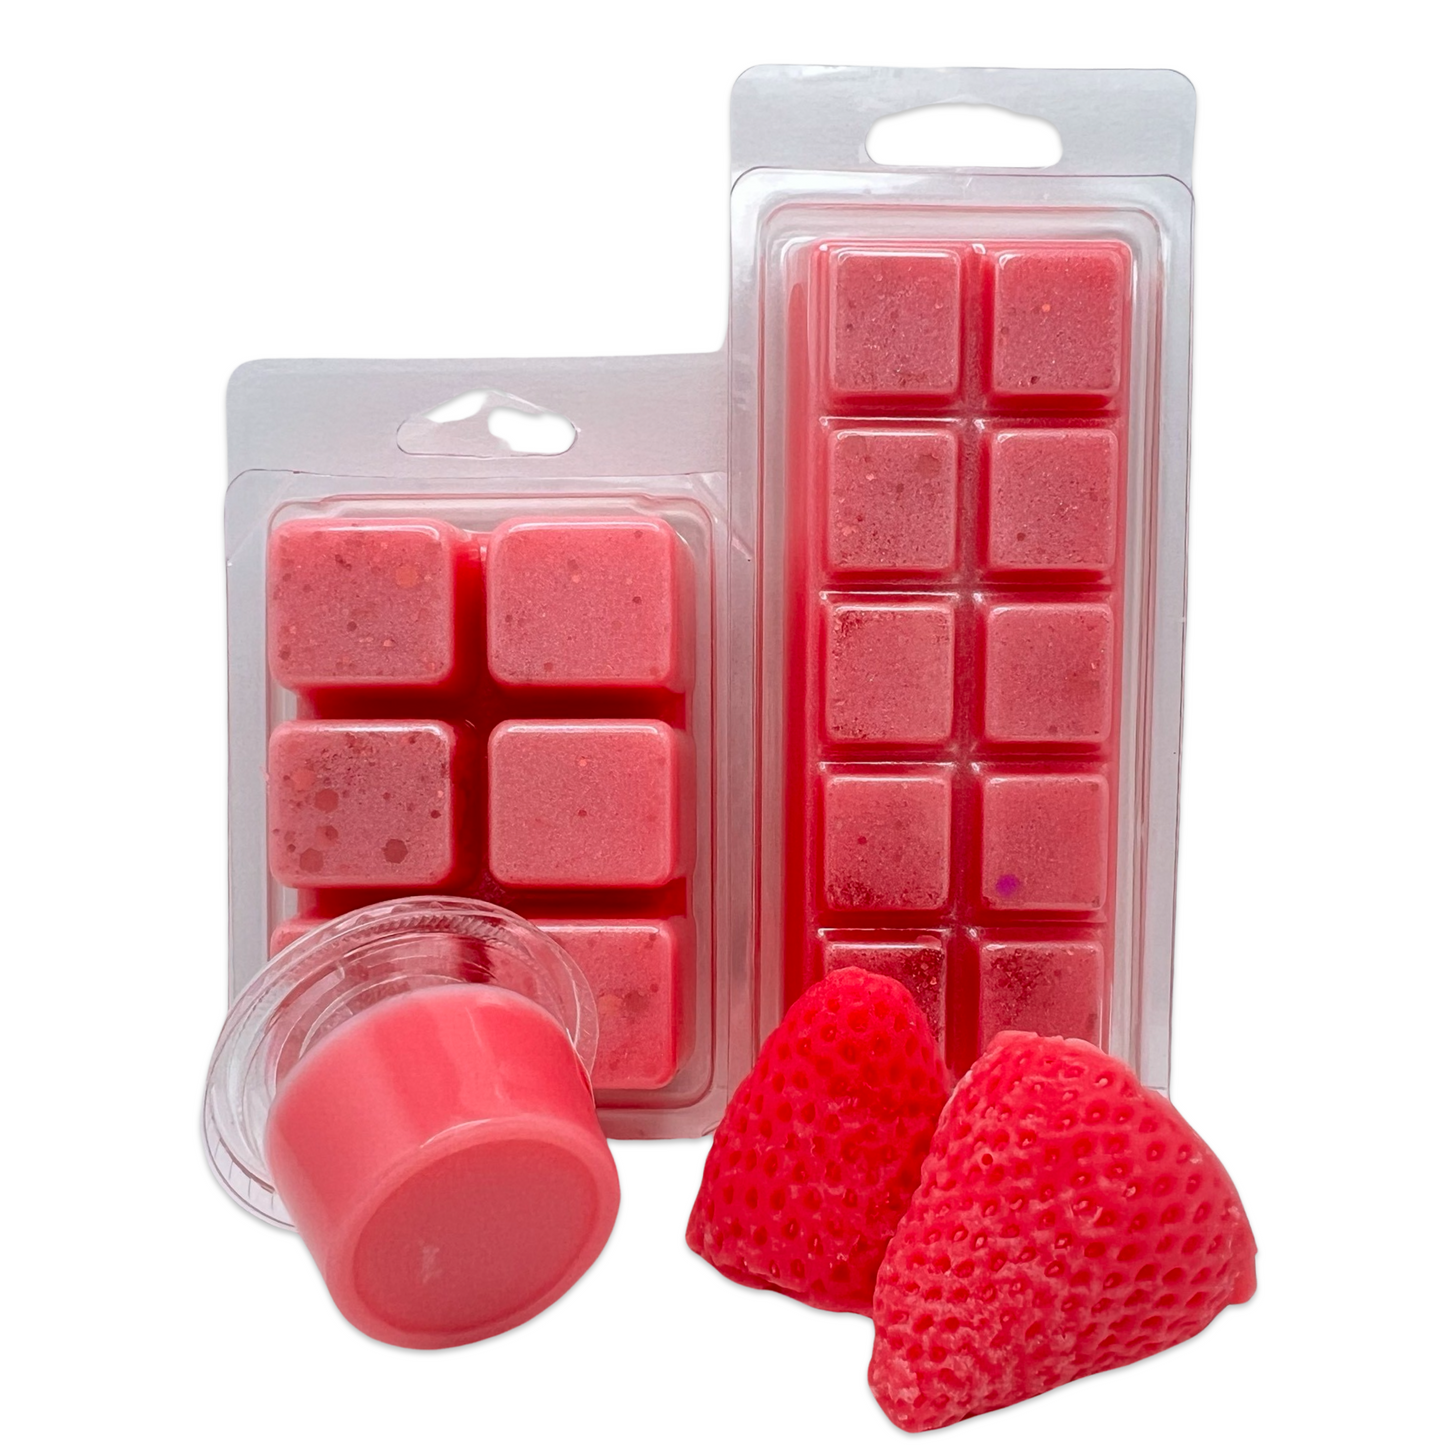 Strawberry Cheesecake, Soy Wax Melts